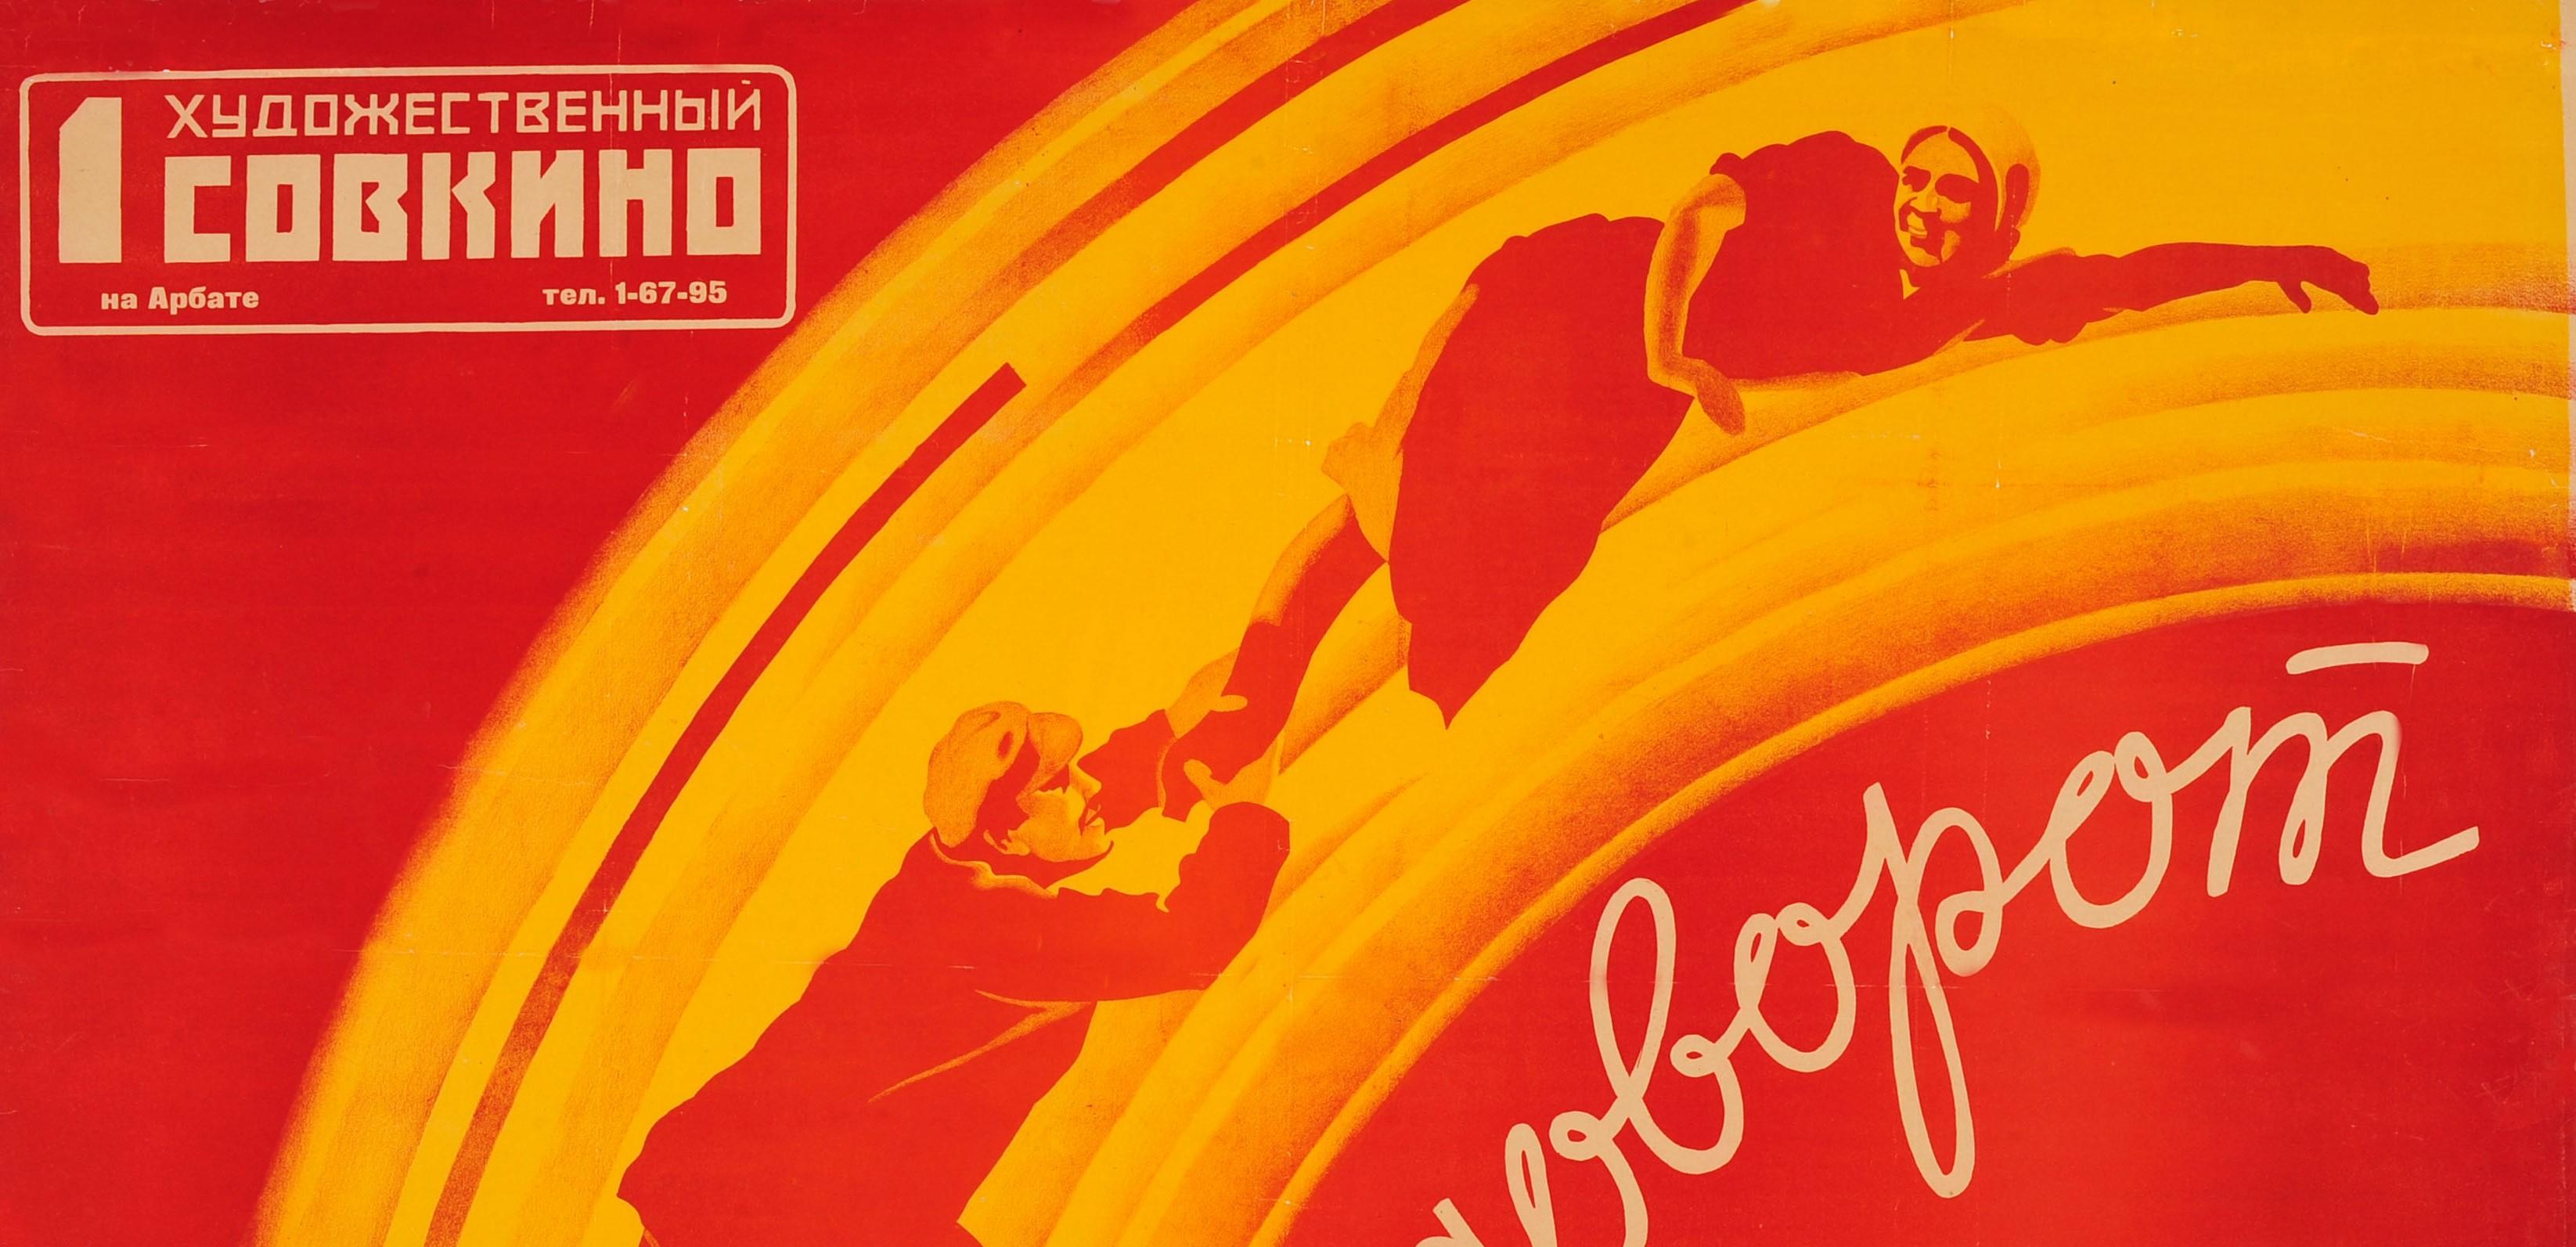 Original vintage Soviet film poster for a silent movie The Whirlpool (????????? / Vodororot) directed by Pavel Petrov-Bytov and starring Tatyana Guretskaya and F. Mikhajlov. Great illustration in red and yellow of a man holding the leg of a lady